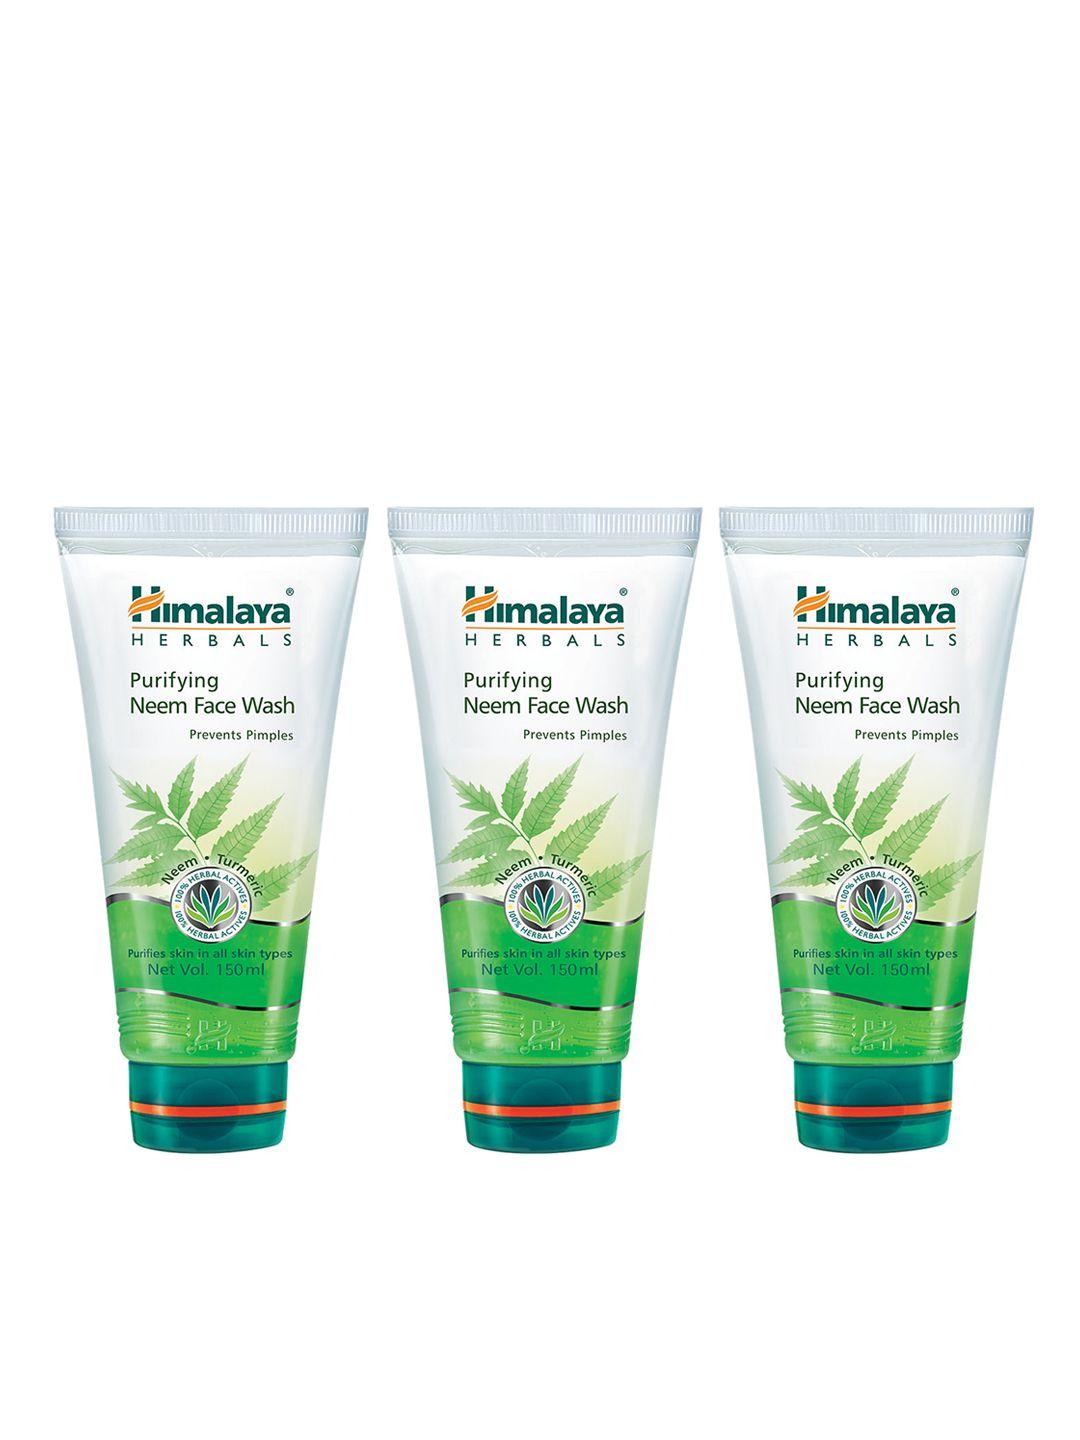 himalaya set of 3 purifying neem face wash for acne-prone skin - 150 ml each